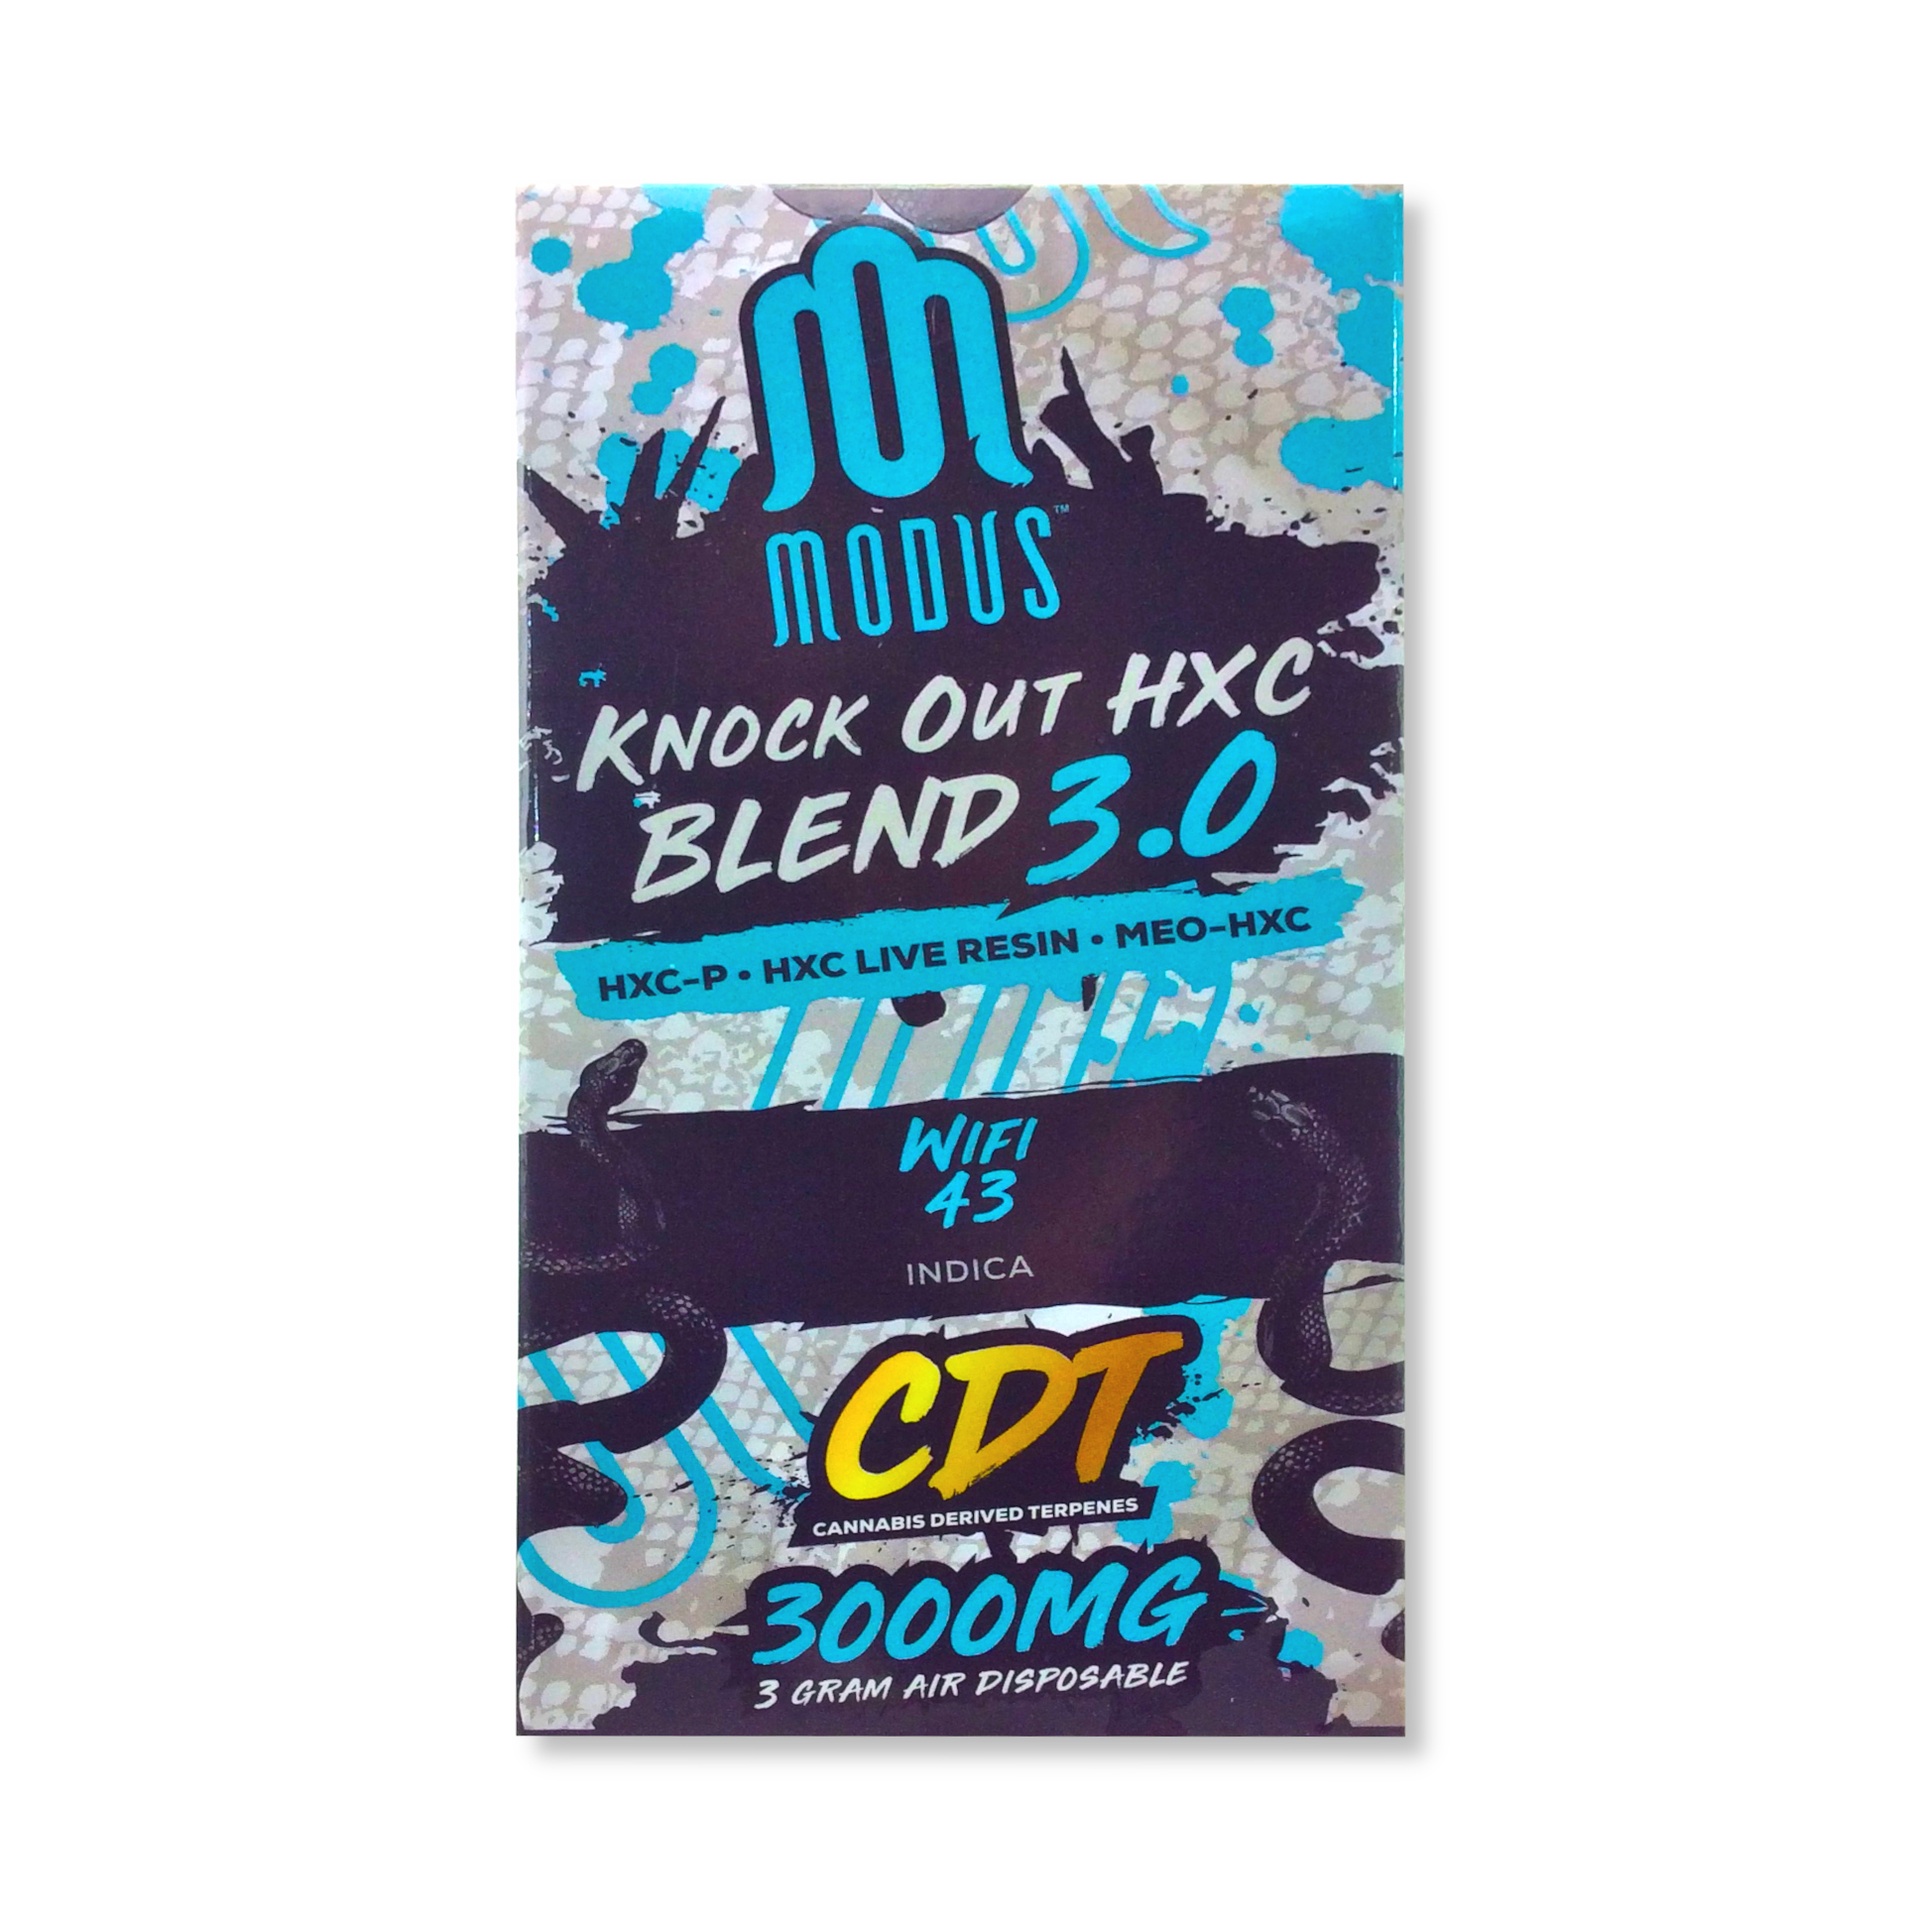 Modus HXC Blend 3.0 3G Disposable (WiFi 43 Indica)